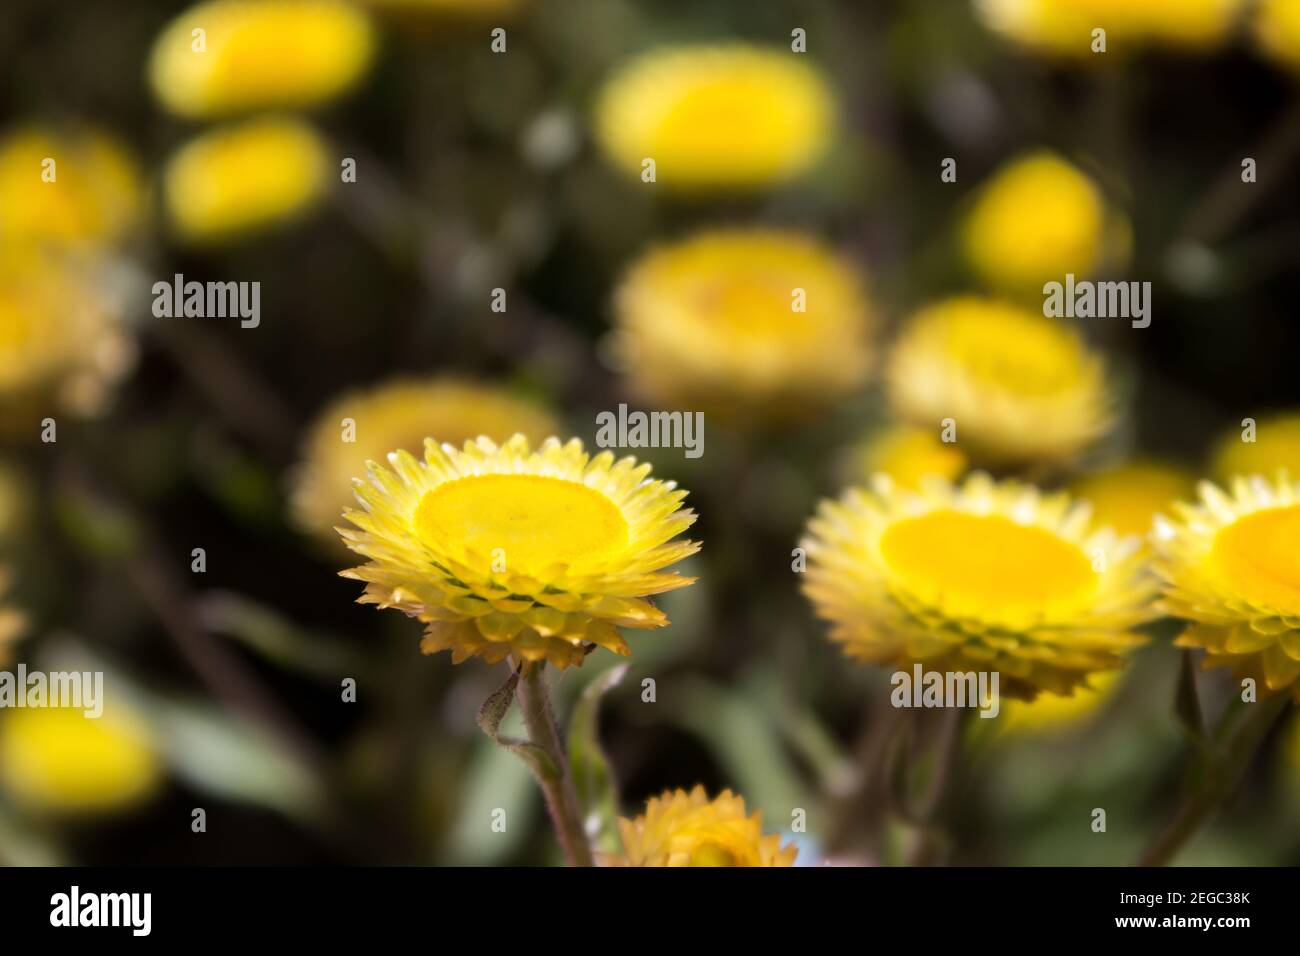 Close-up of the delicate flowers of the yellow everlasting, Helichrysum cooperi, photographed in the Drakensberg Mountains of South Africa Stock Photo